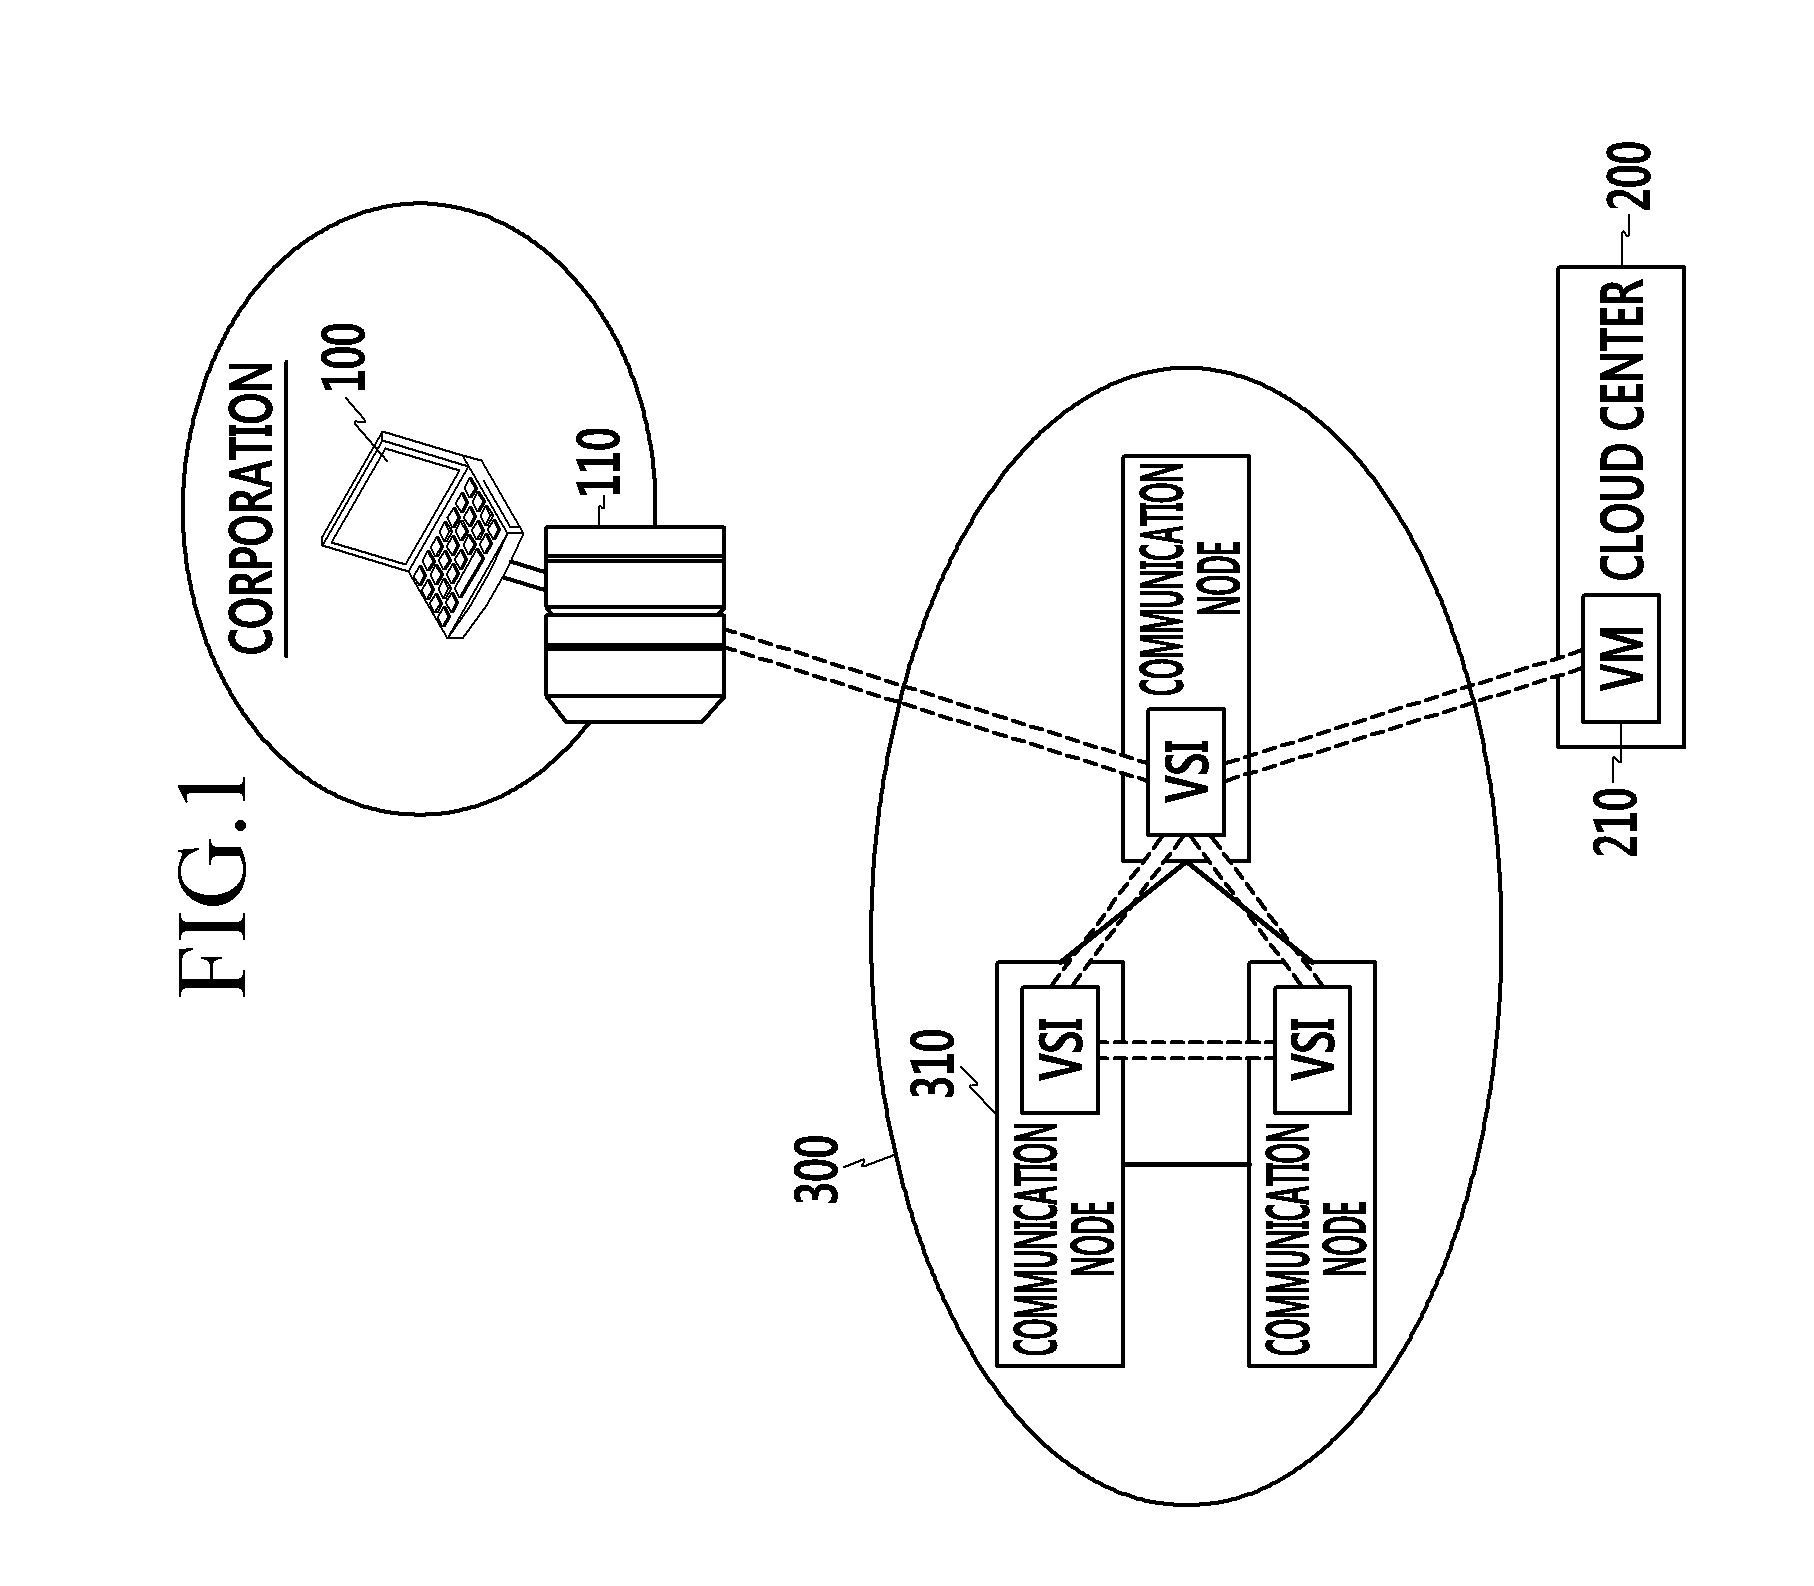 Apparatus and method for cloud networking